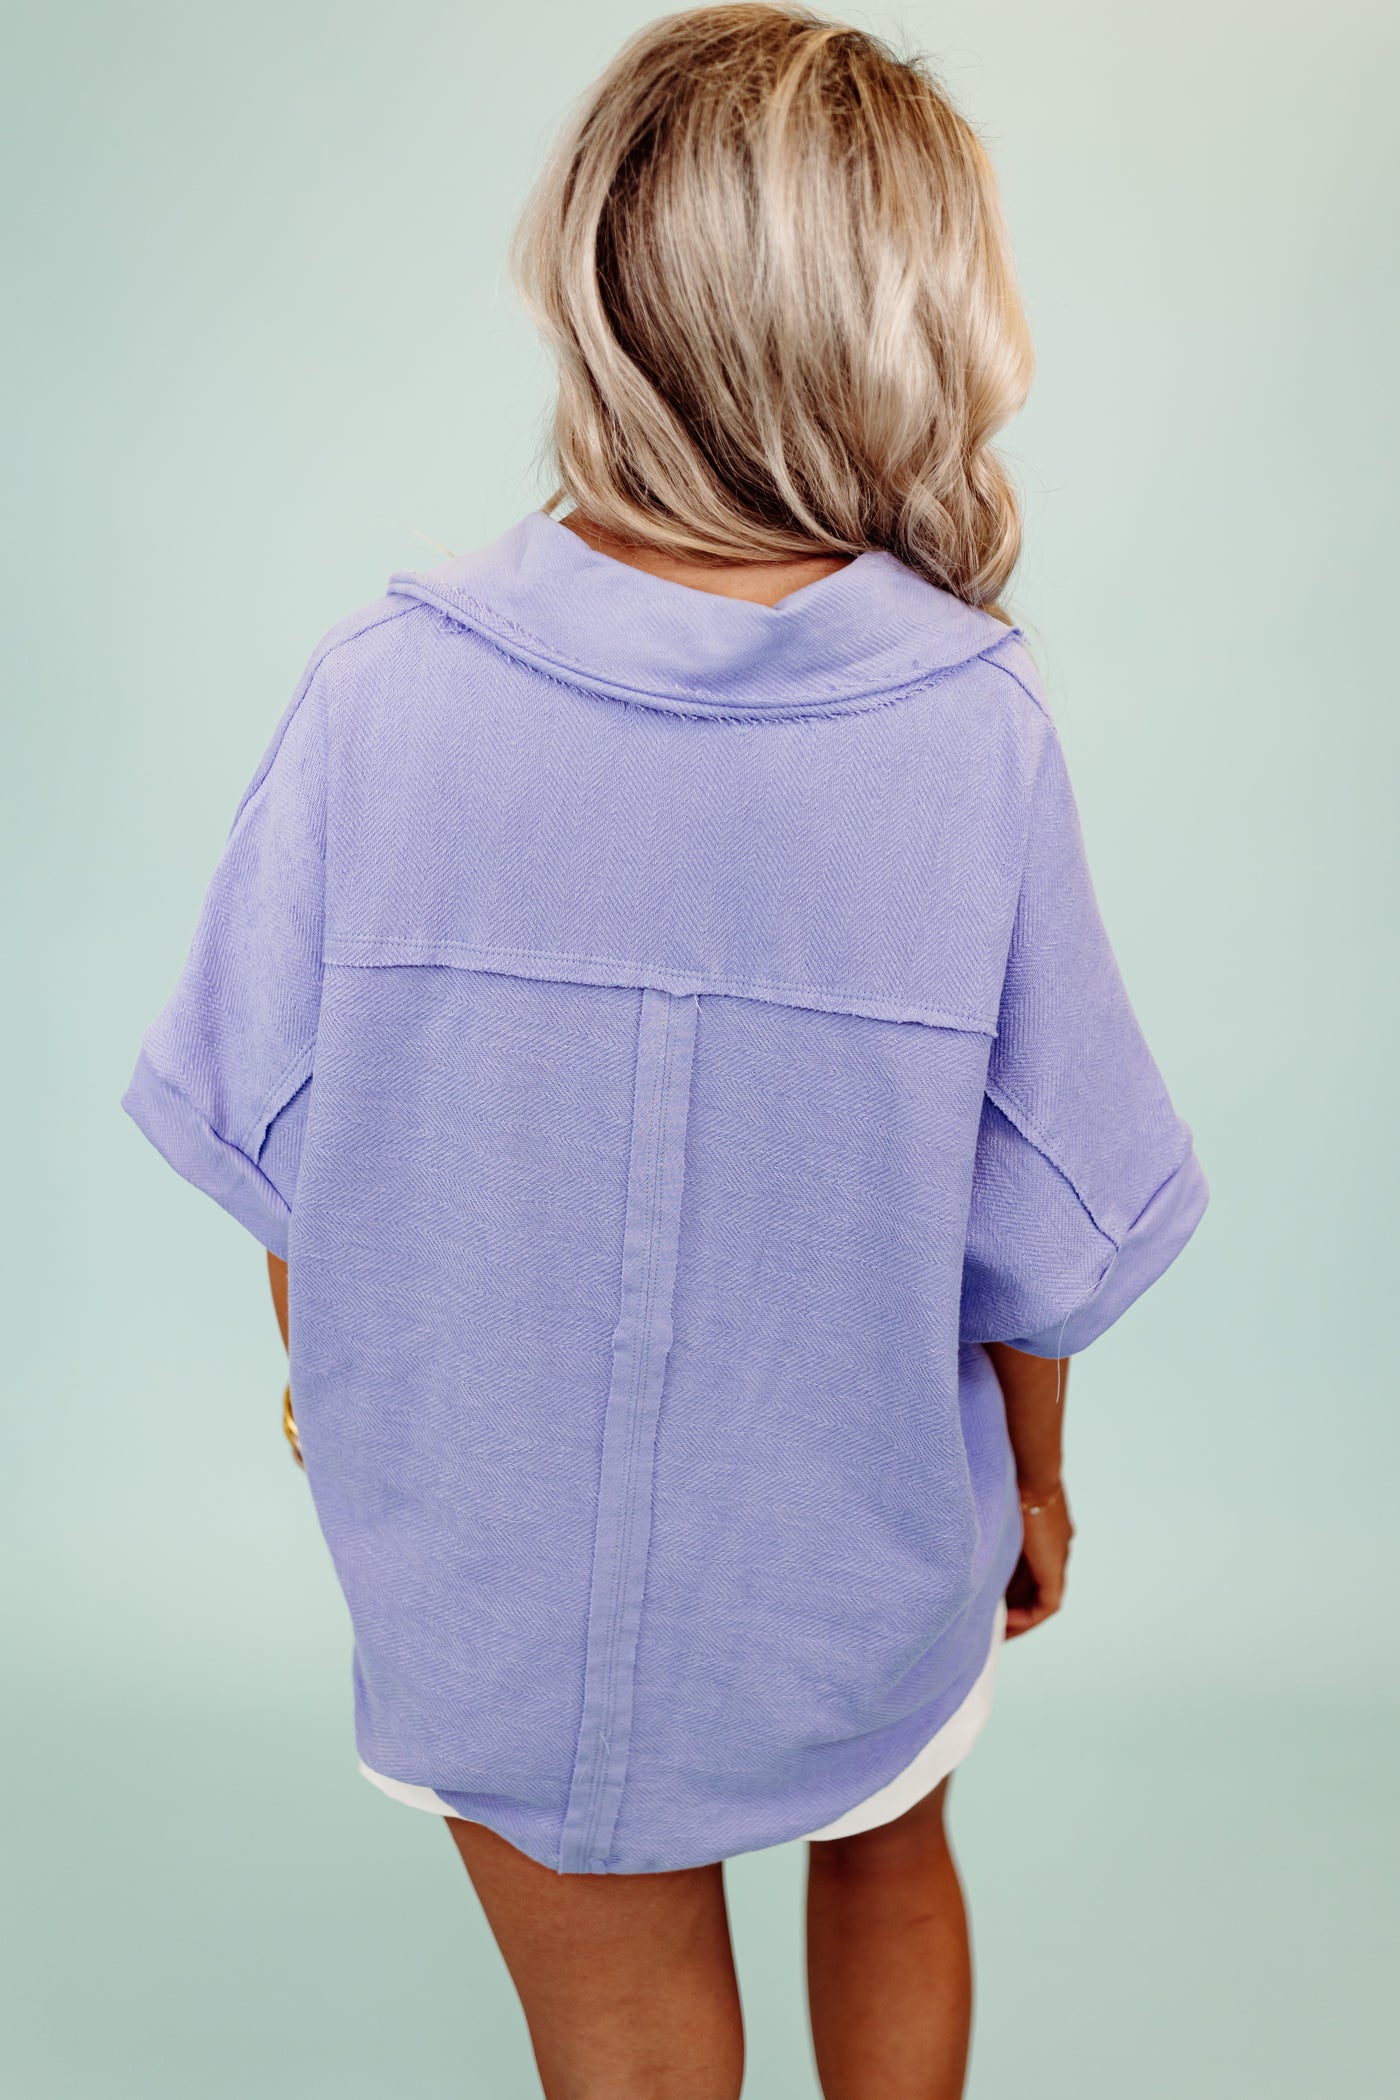 Periwinkle French Terry Collared Loose Fit Top